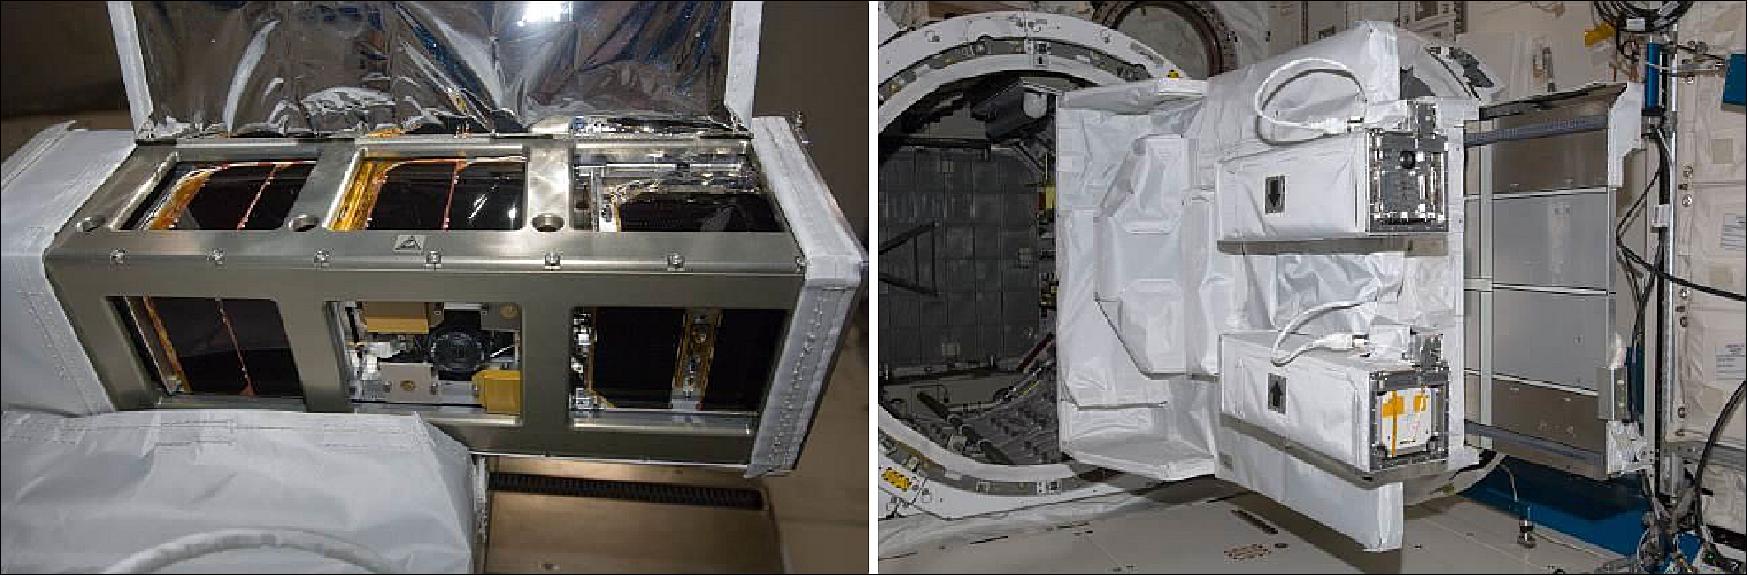 Figure 25: Installation on the Airlock slide table in JEM PM. Left: The satellite is installed in the Satellite Install Case; Right: The Satellite Install Case is installed on the MPEP (image credit JAXA/NASA)